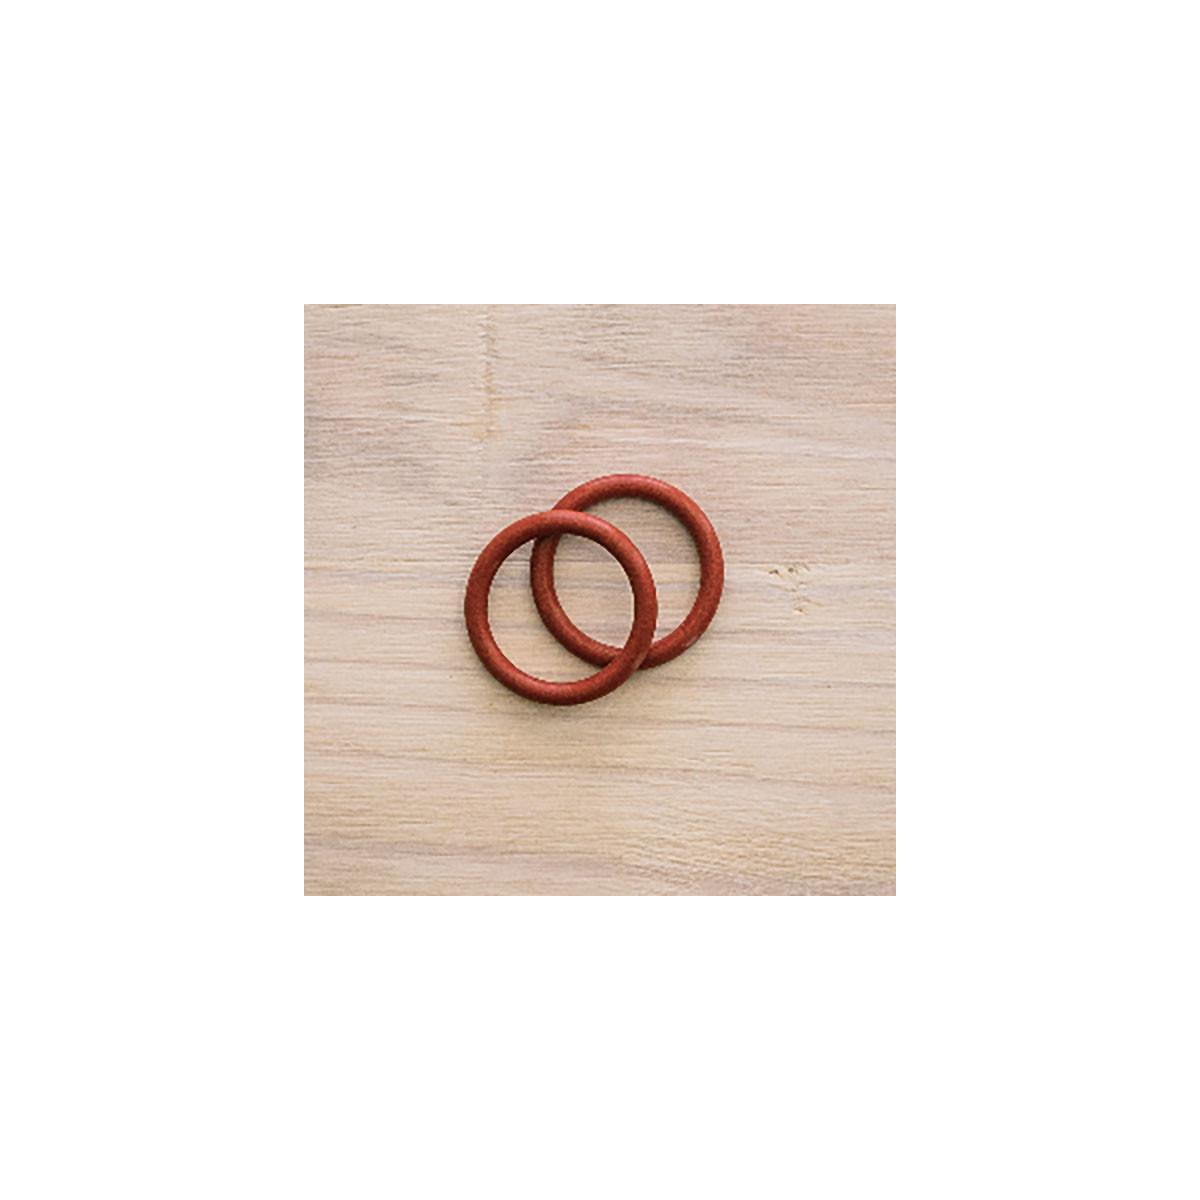 Ss Brewtech™ replacement O-rings for Ss Brew Kettle compression fittings